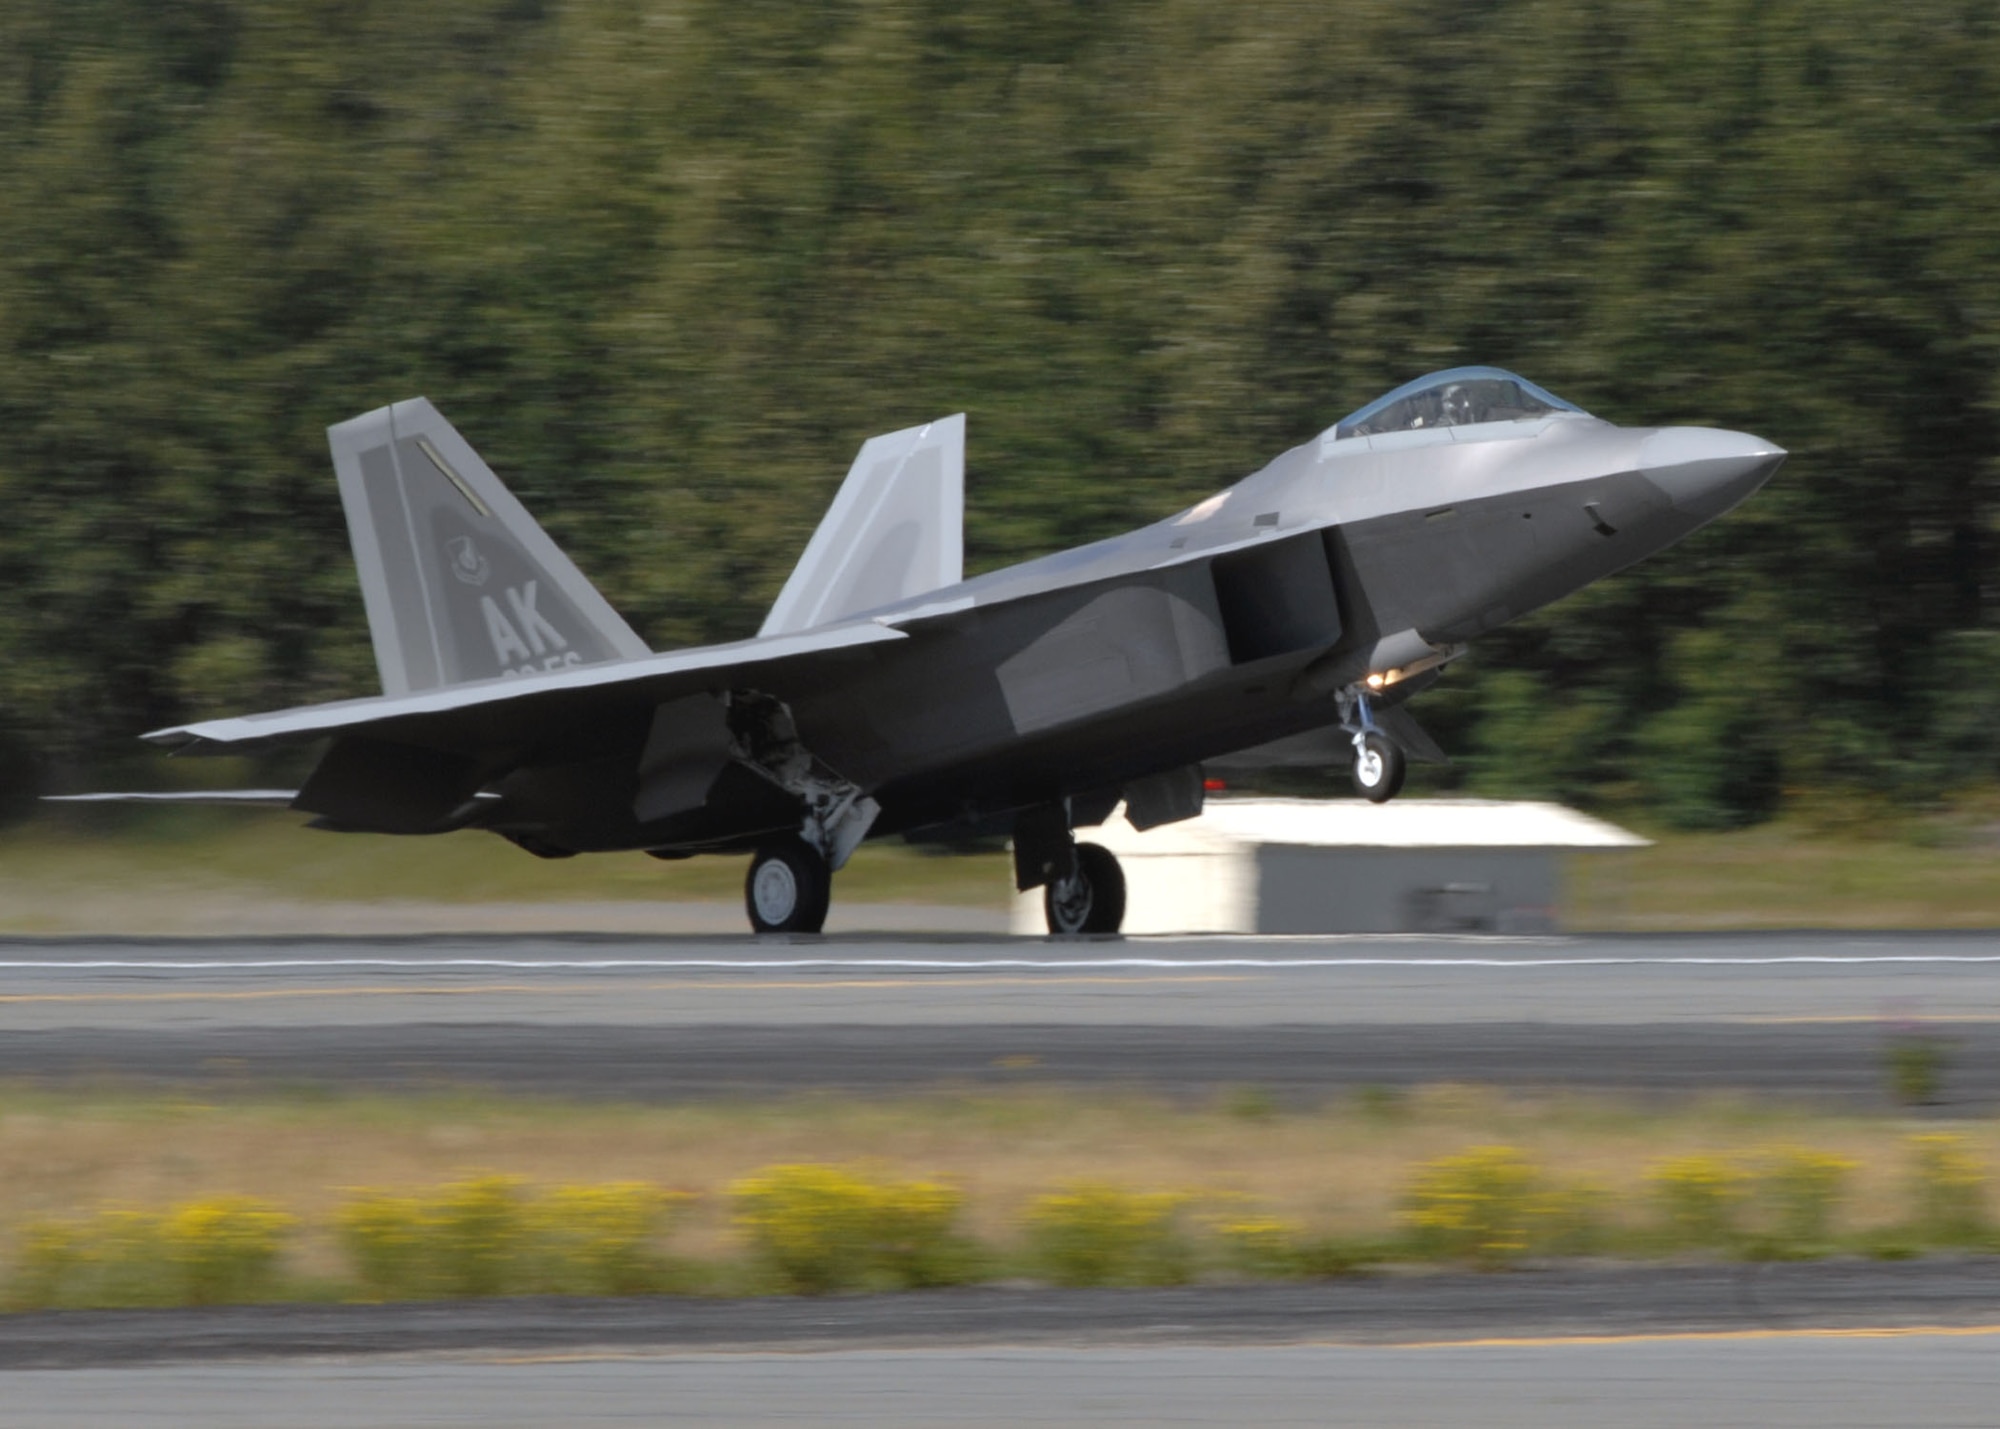 An F-22 Raptor touches down at Elmendorf Air Force Base, Alaska, during a ceremony marking the aircraft's arrival Aug. 8. Elmendorf became the second operational base and the first Pacific Air Forces installation to receive the aircraft. The F-22 performs both air-to-air and air-to-ground missions allowing full realization of operational concepts vital to the 21st century Air Force. (U.S. Air Force photo/Airman 1st Class Laura Turner)
